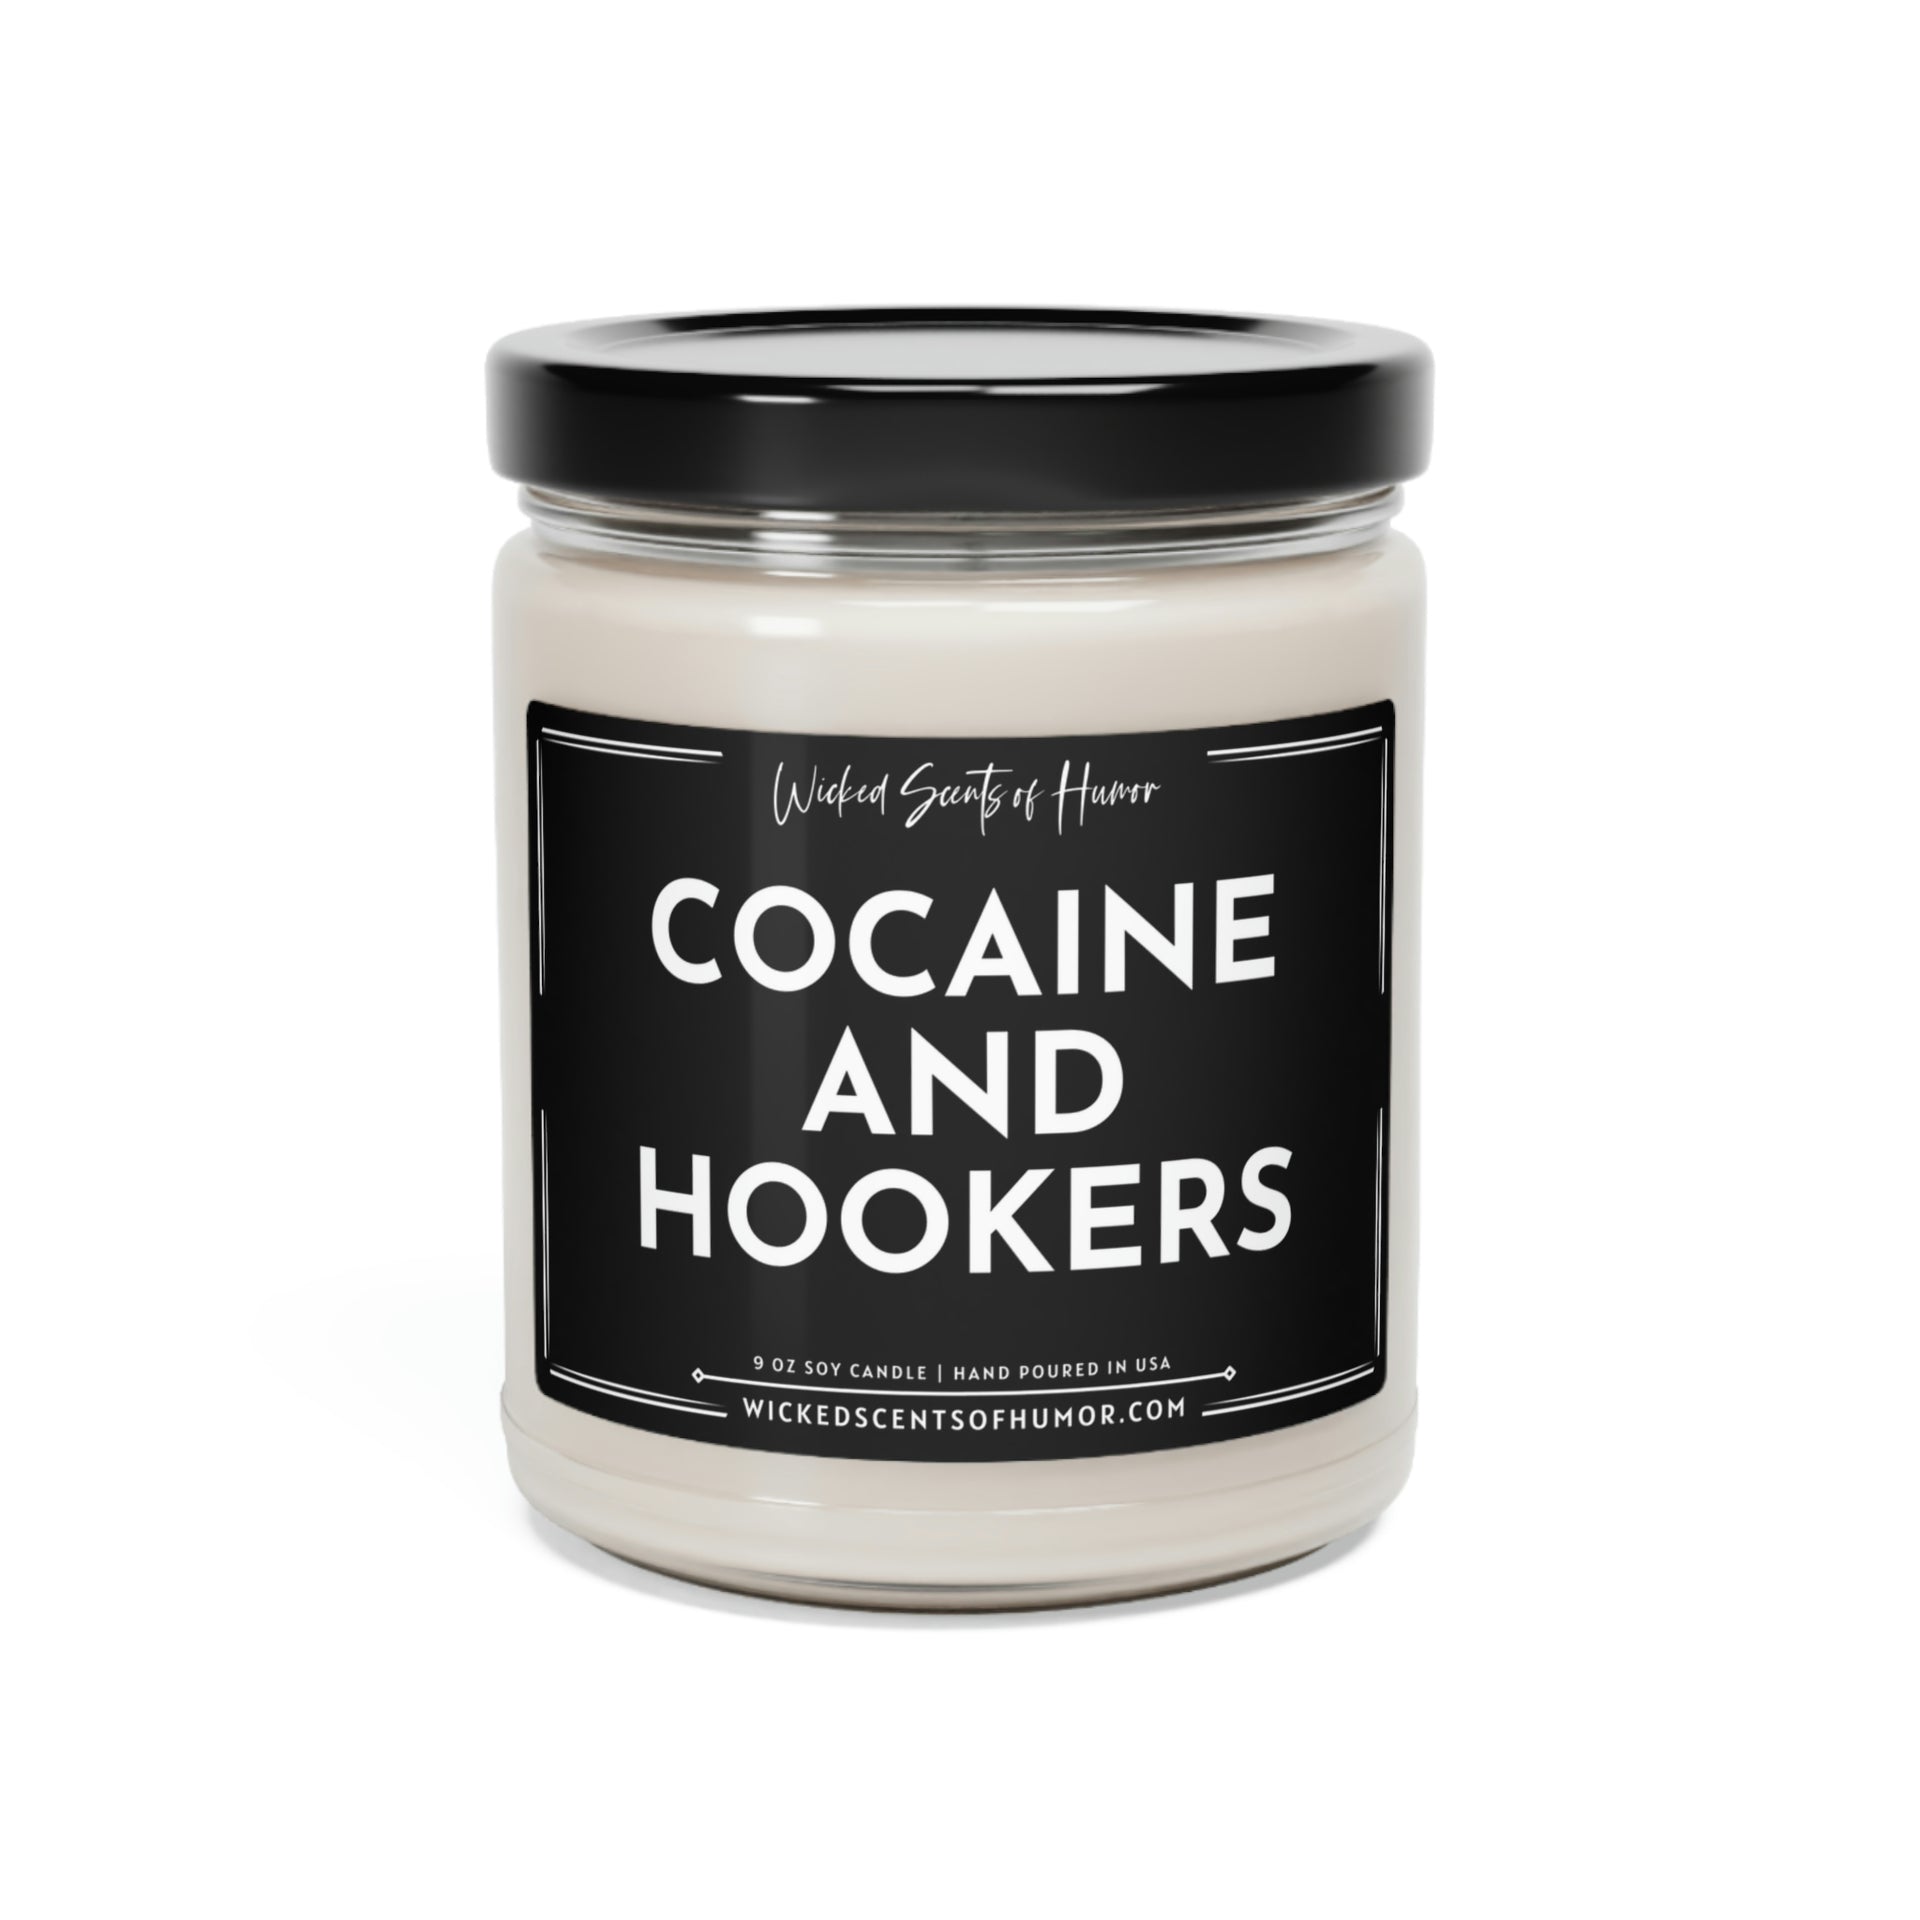  Cocaine and Hookers Funny Candle, Gag Gift, Gift for